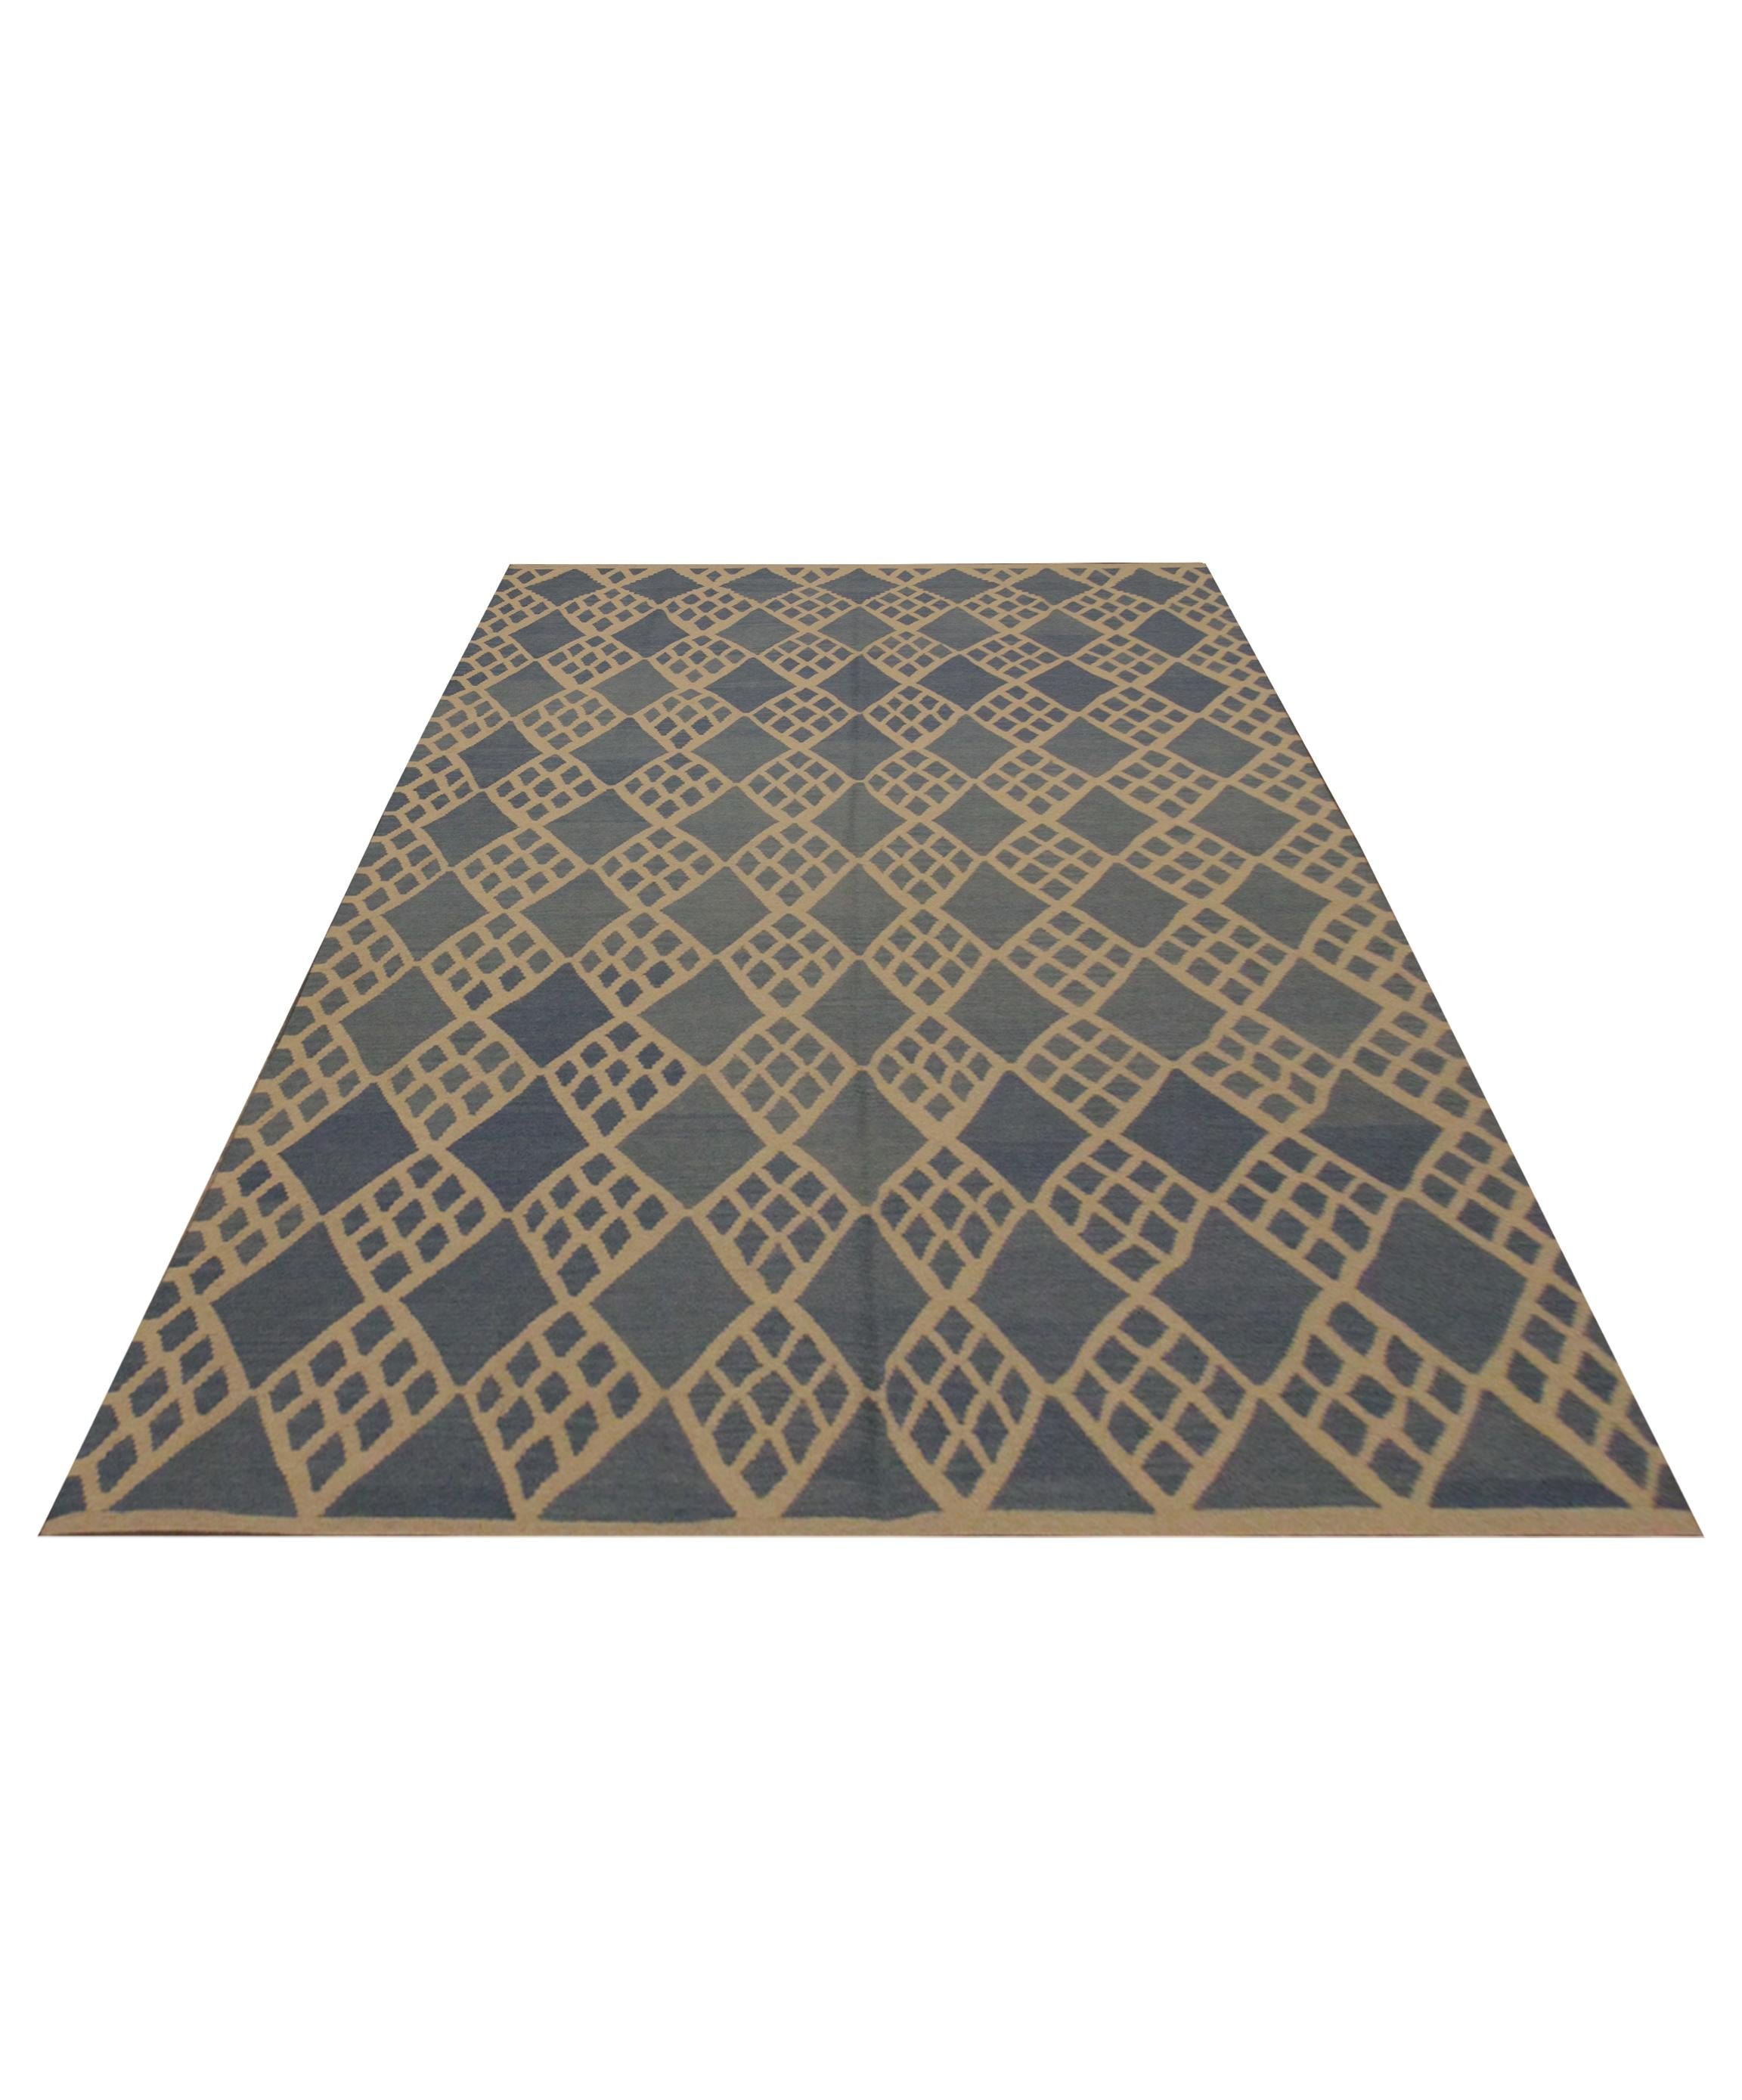 This blue and cream wool area rug is a handmade Kilim constructed in Afghanistan. The design features an all-over, symmetrical, geometric pattern similar to the interior of the Scandinavian colour palette. The bold design and subtle colour palette